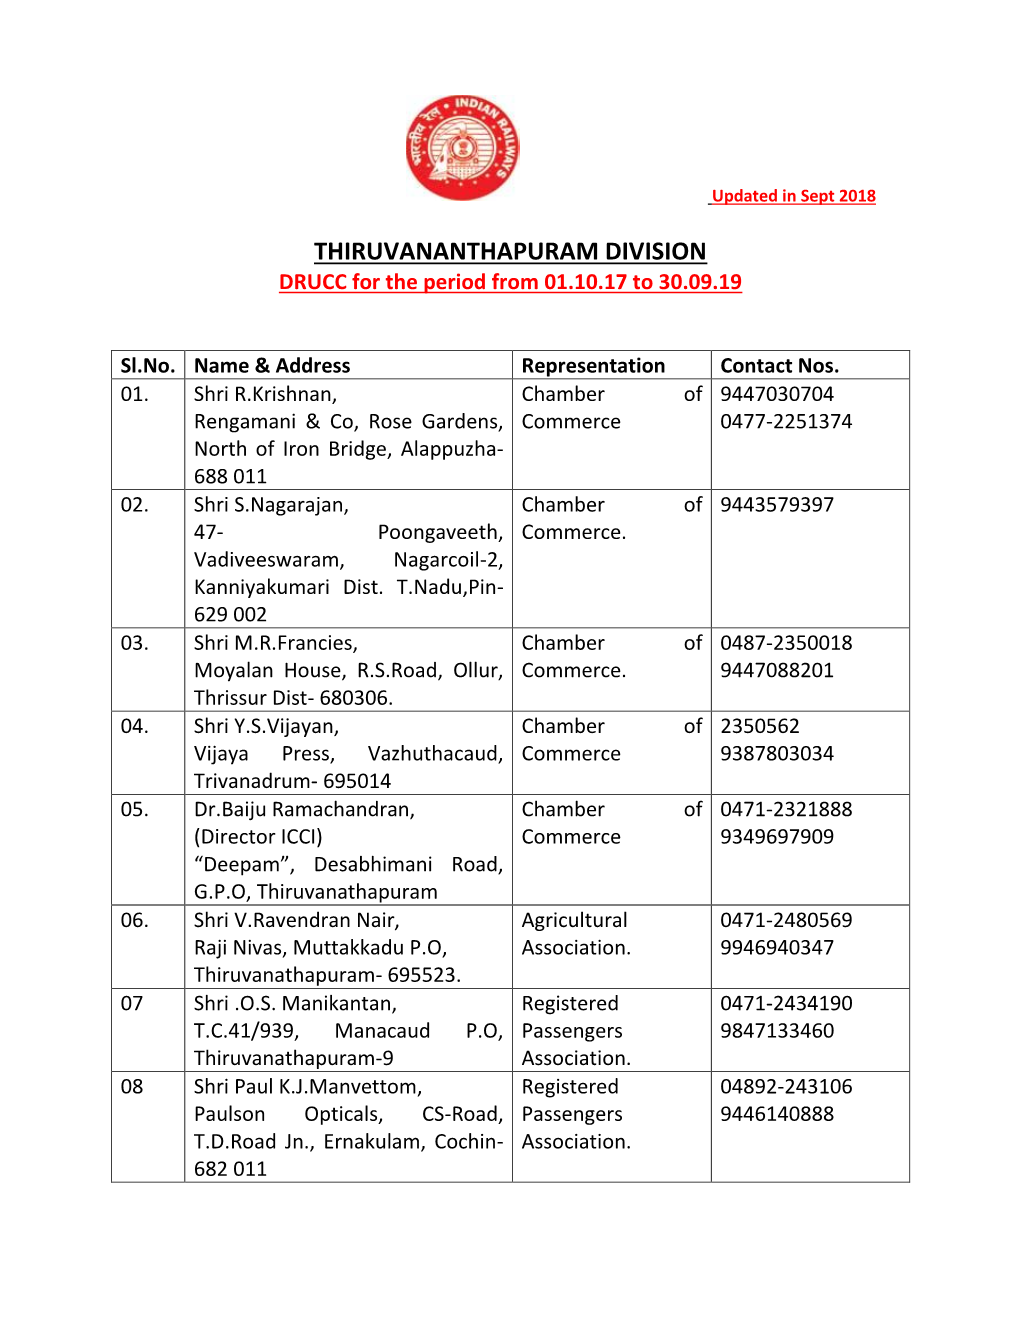 THIRUVANANTHAPURAM DIVISION DRUCC for the Period from 01.10.17 to 30.09.19